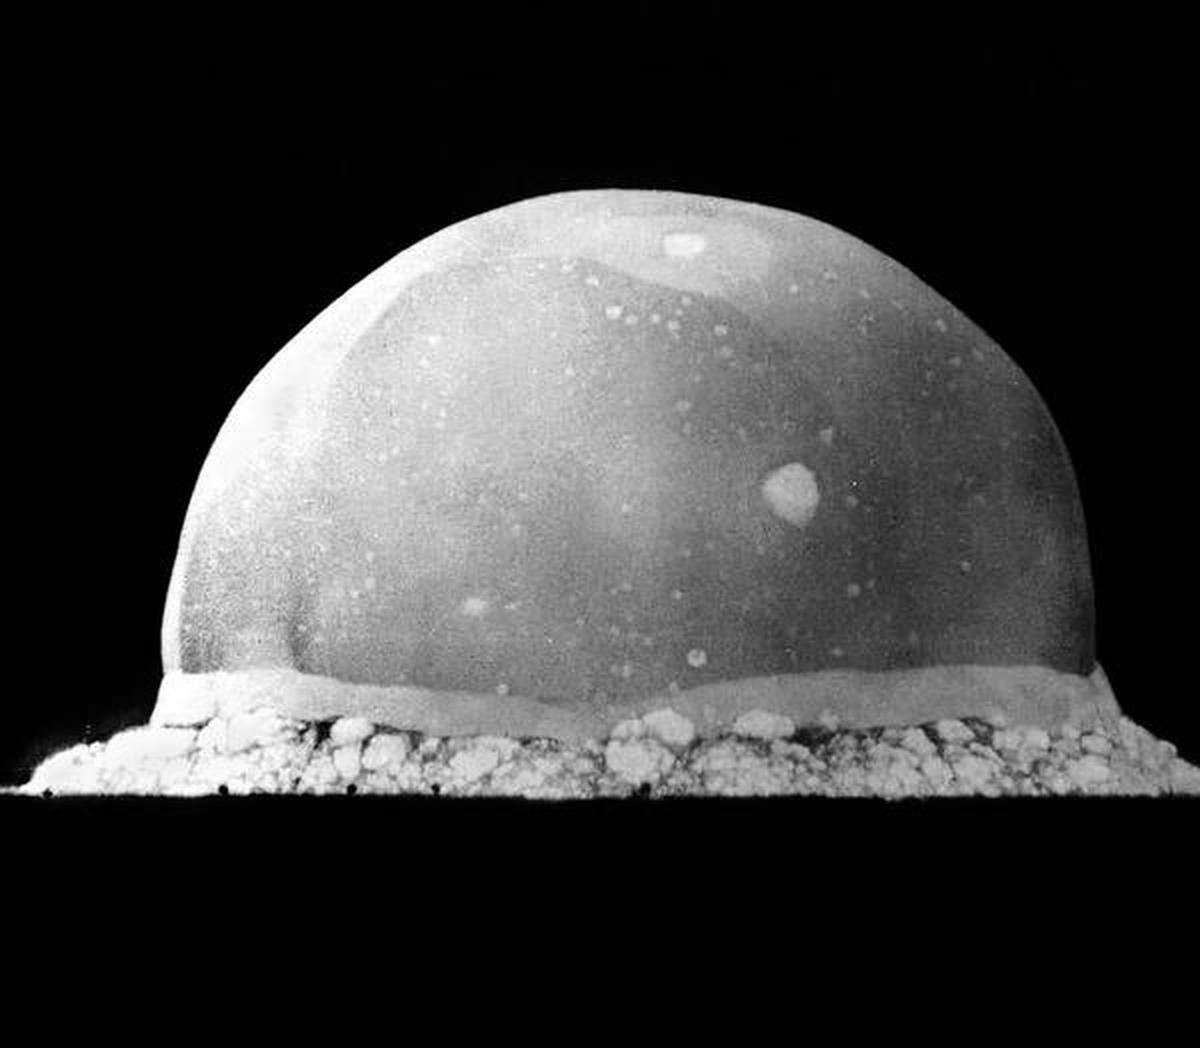 A black and white image of the first nuclear test at the Trinity site, seconds after the explosion took place.